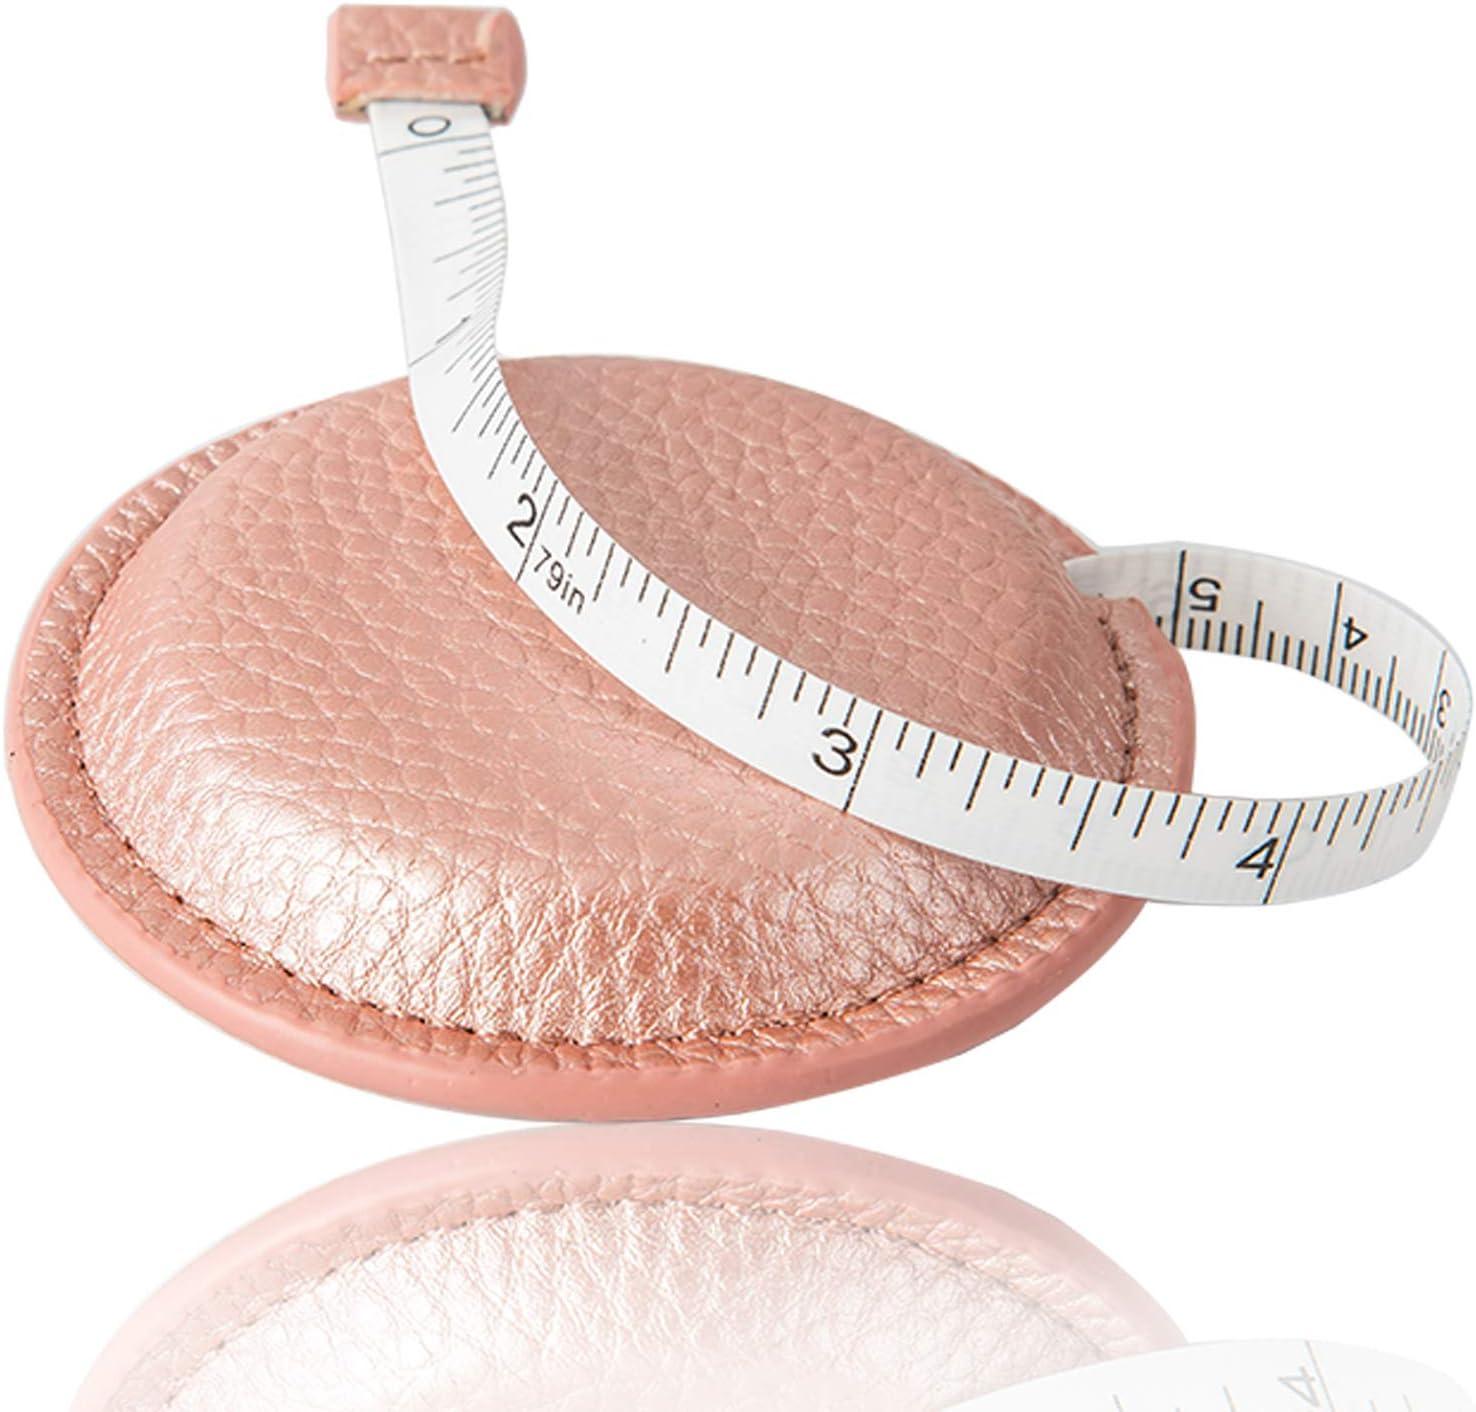 2 Pack Tape Measure for Body Measuring 79Inch/2Meters Retractable Tape  Measure for Body Fabric Sewing Tailor Cloth Knitting Craft Measurements  Dual Sided (Nude Pink 2 Pack)